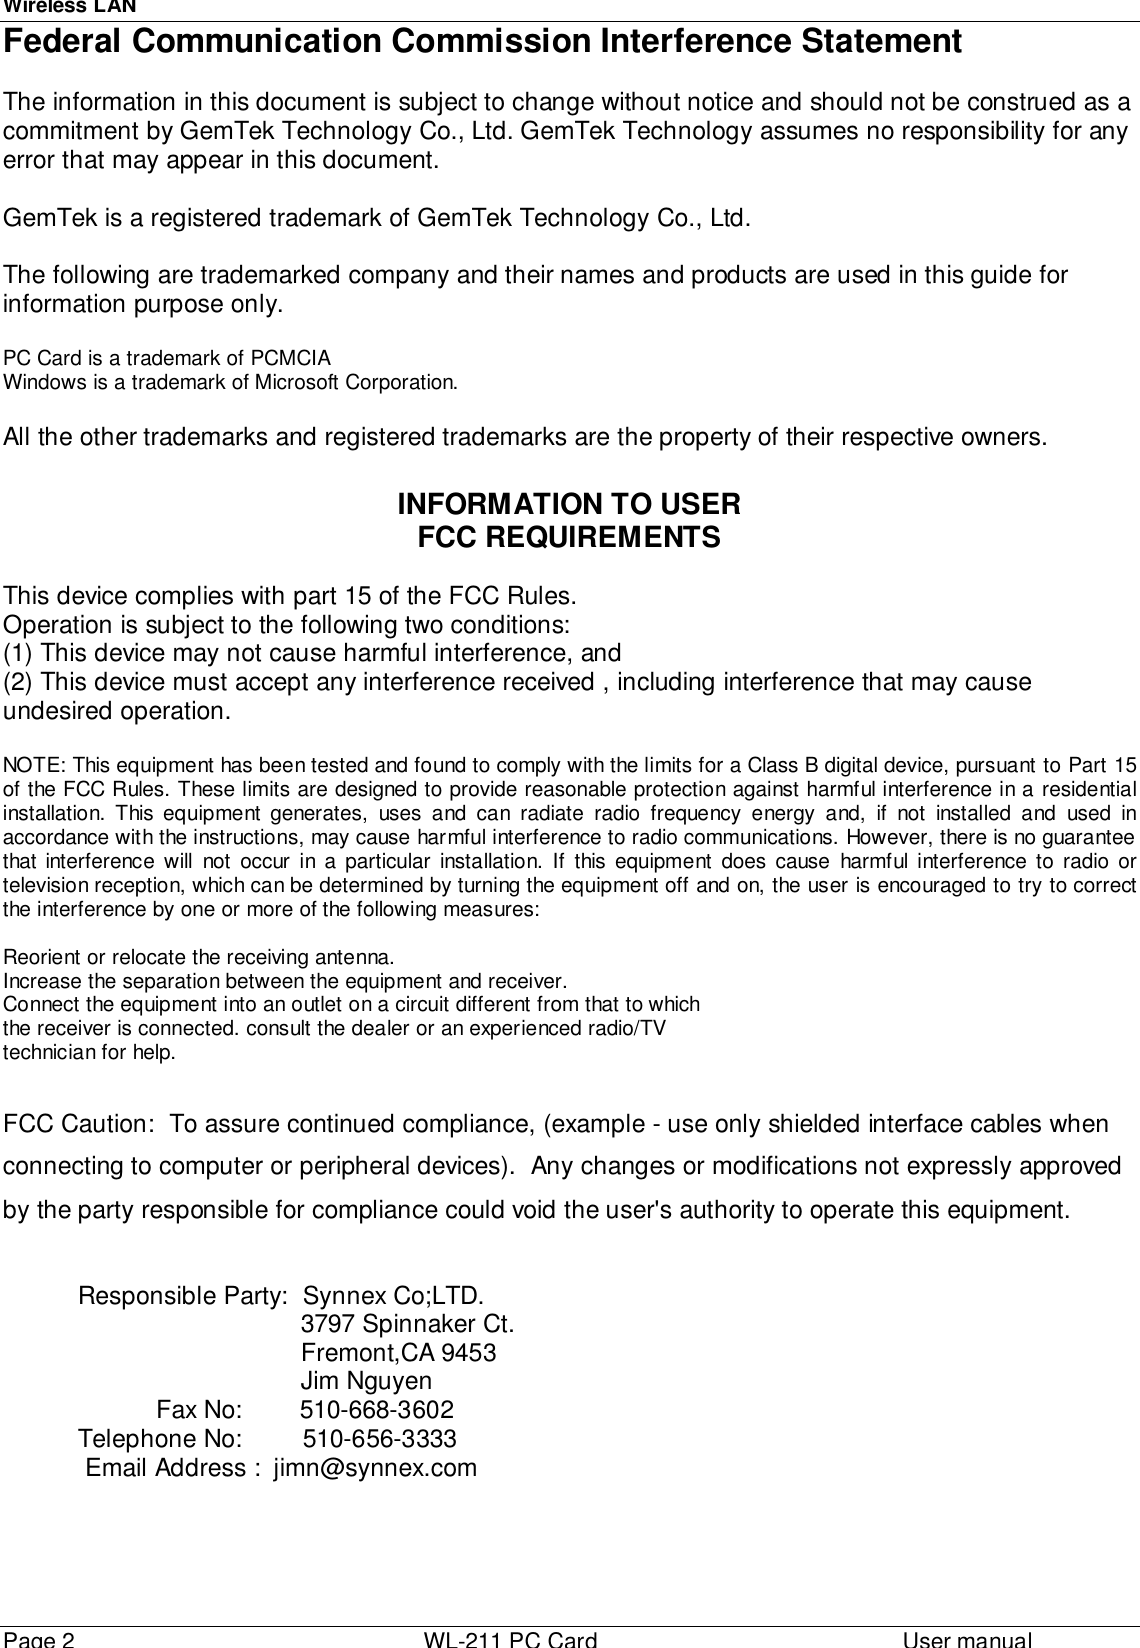 Wireless LANPage 2 WL-211 PC Card User manual Federal Communication Commission Interference Statement The information in this document is subject to change without notice and should not be construed as acommitment by GemTek Technology Co., Ltd. GemTek Technology assumes no responsibility for anyerror that may appear in this document.GemTek is a registered trademark of GemTek Technology Co., Ltd.The following are trademarked company and their names and products are used in this guide forinformation purpose only.PC Card is a trademark of PCMCIAWindows is a trademark of Microsoft Corporation.All the other trademarks and registered trademarks are the property of their respective owners.INFORMATION TO USERFCC REQUIREMENTSThis device complies with part 15 of the FCC Rules.Operation is subject to the following two conditions:(1) This device may not cause harmful interference, and(2) This device must accept any interference received , including interference that may causeundesired operation.NOTE: This equipment has been tested and found to comply with the limits for a Class B digital device, pursuant to Part 15of the FCC Rules. These limits are designed to provide reasonable protection against harmful interference in a residentialinstallation. This equipment generates, uses and can radiate radio frequency energy and, if not installed and used inaccordance with the instructions, may cause harmful interference to radio communications. However, there is no guaranteethat interference will not occur in a particular installation. If this equipment does cause harmful interference to radio ortelevision reception, which can be determined by turning the equipment off and on, the user is encouraged to try to correctthe interference by one or more of the following measures:Reorient or relocate the receiving antenna.Increase the separation between the equipment and receiver.Connect the equipment into an outlet on a circuit different from that to whichthe receiver is connected. consult the dealer or an experienced radio/TV technician for help. FCC Caution:  To assure continued compliance, (example - use only shielded interface cables whenconnecting to computer or peripheral devices).  Any changes or modifications not expressly approvedby the party responsible for compliance could void the user&apos;s authority to operate this equipment.Responsible Party: Synnex Co;LTD.                                3797 Spinnaker Ct.                                Fremont,CA 9453                                Jim Nguyen                      Fax No:        510-668-3602Telephone No: 510-656-3333 Email Address :  jimn@synnex.com